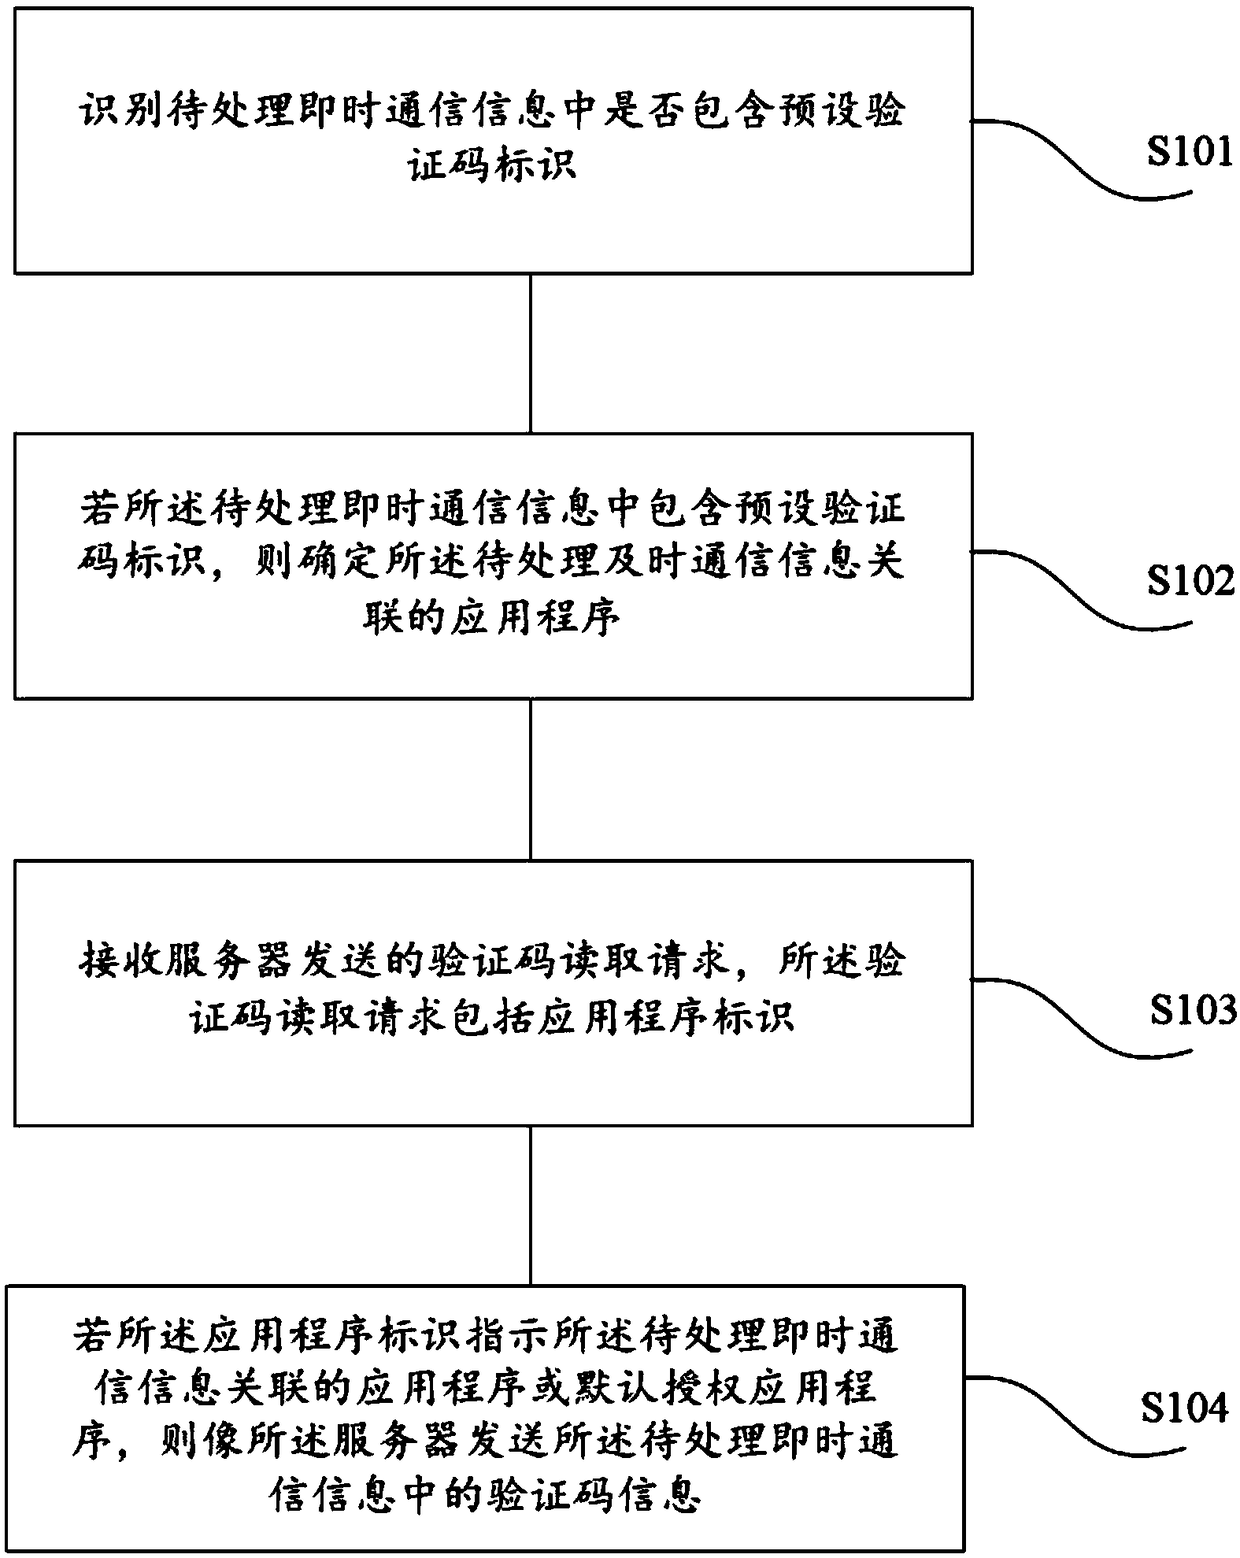 Instant messaging information verification code protection method and device